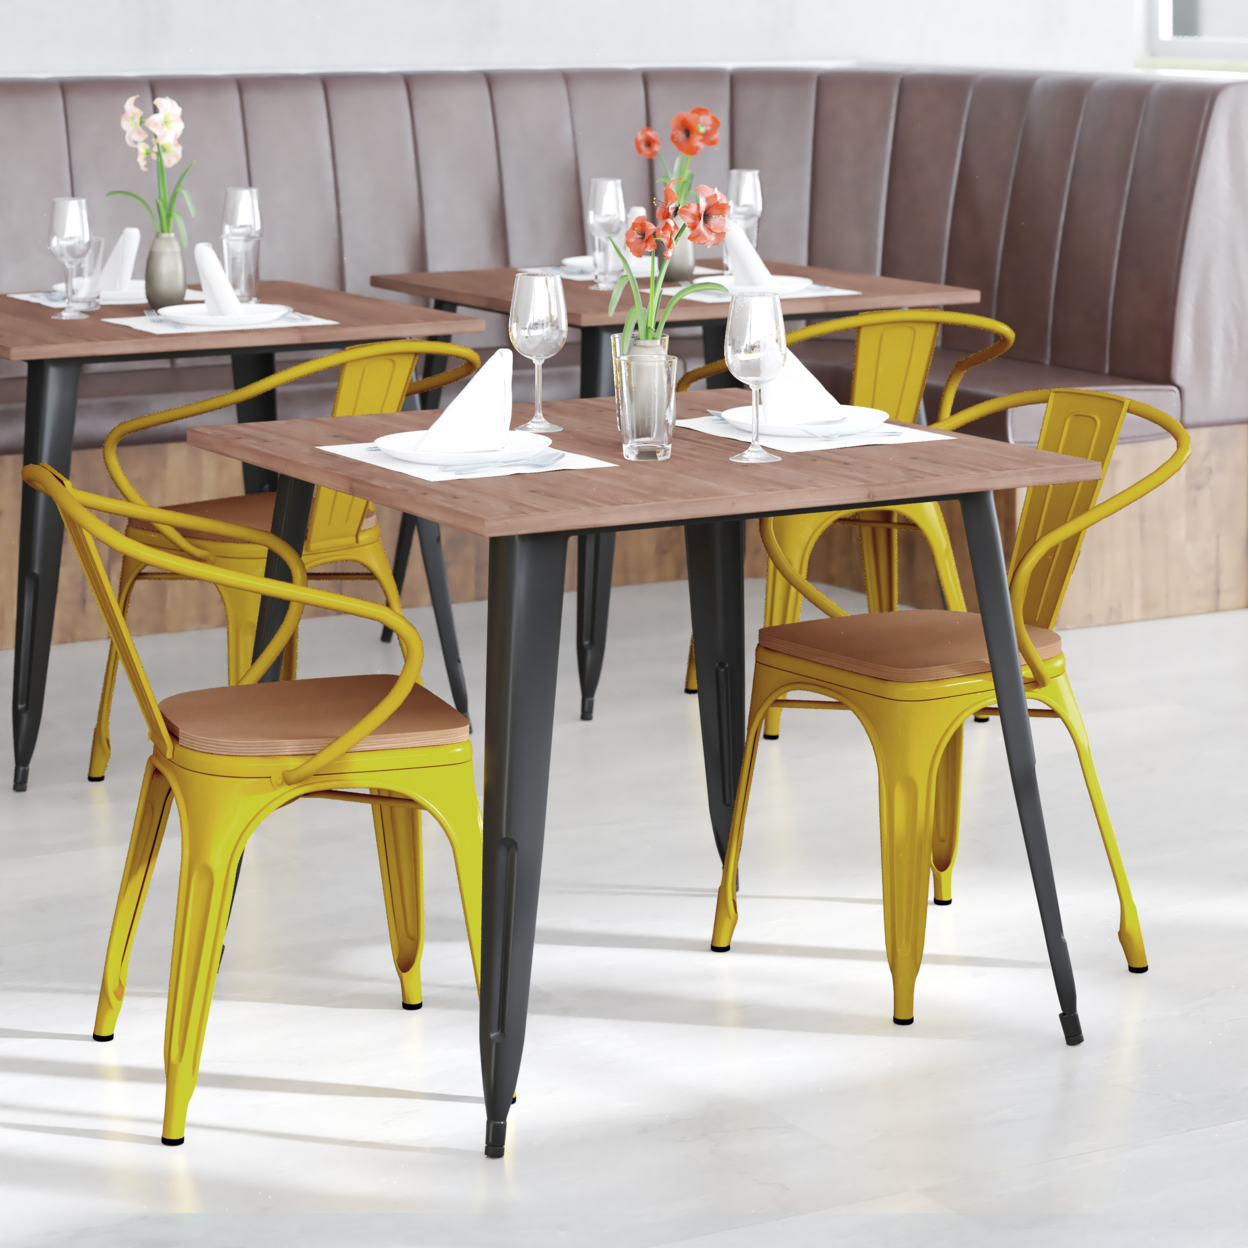 Metal Chair, Open Design Curved Arms, Polyresin Teal Blue Seat, Yellow